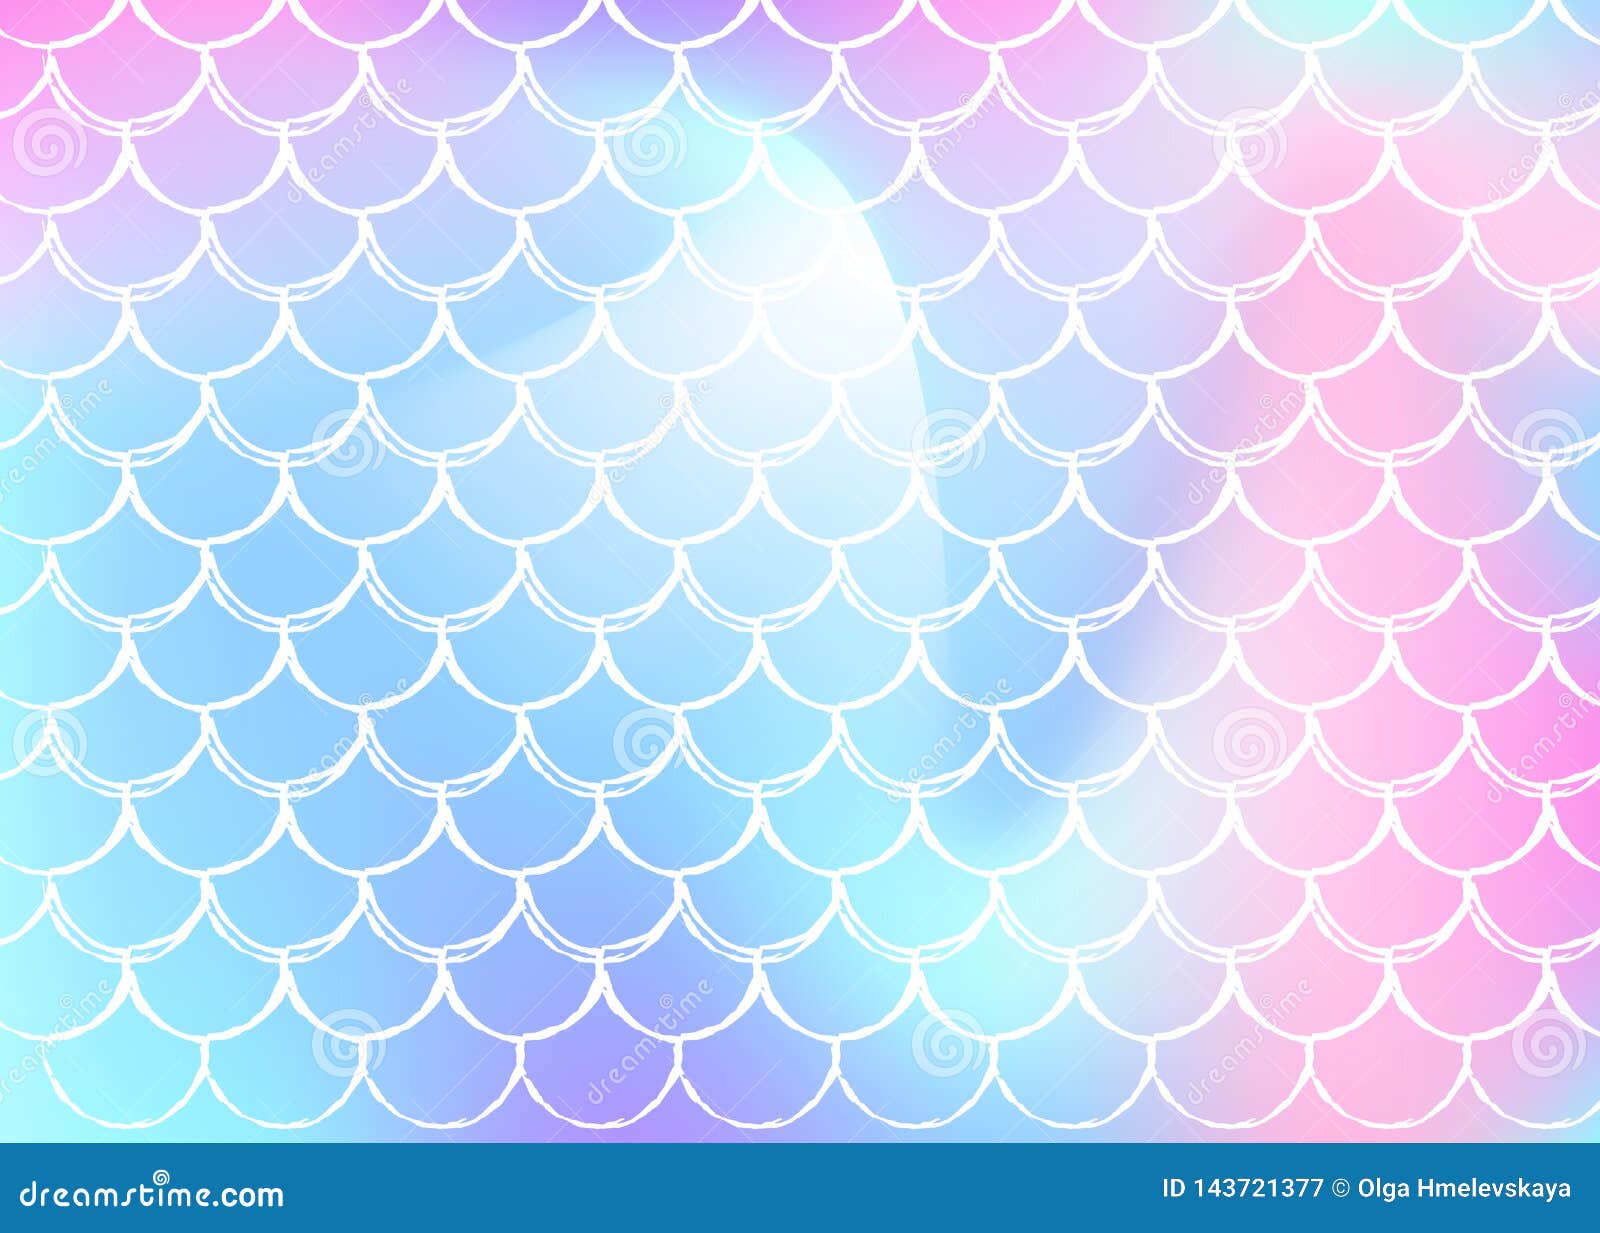 Mermaid Scales Background with Holographic Gradient. Stock Vector ...